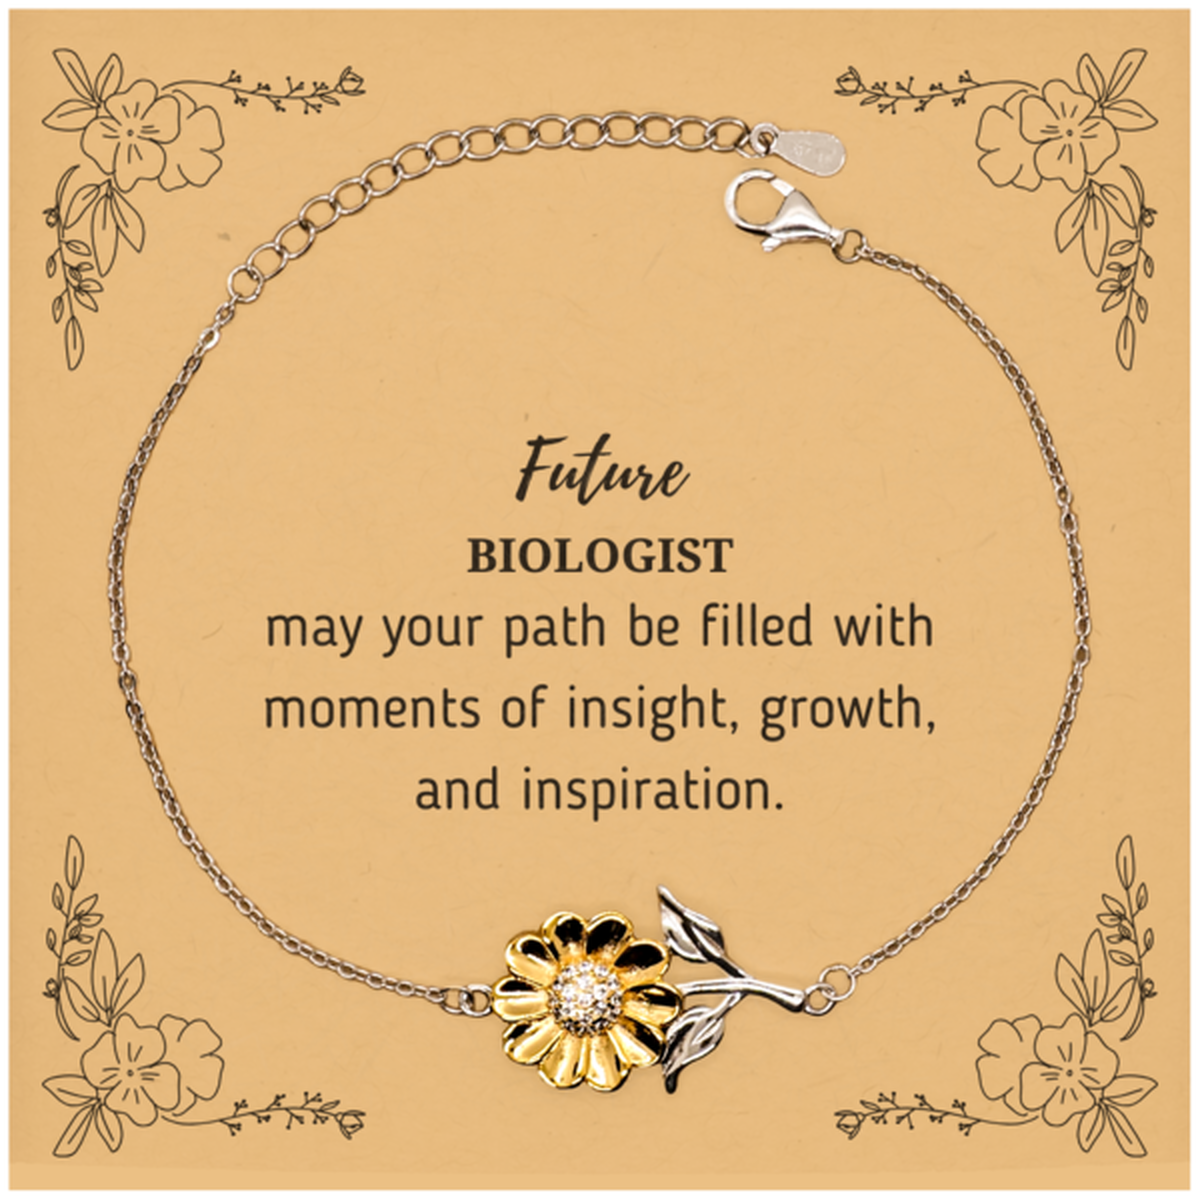 Future Biologist Gifts, May your path be filled with moments of insight, Graduation Gifts for New Biologist, Christmas Unique Sunflower Bracelet For Men, Women, Friends